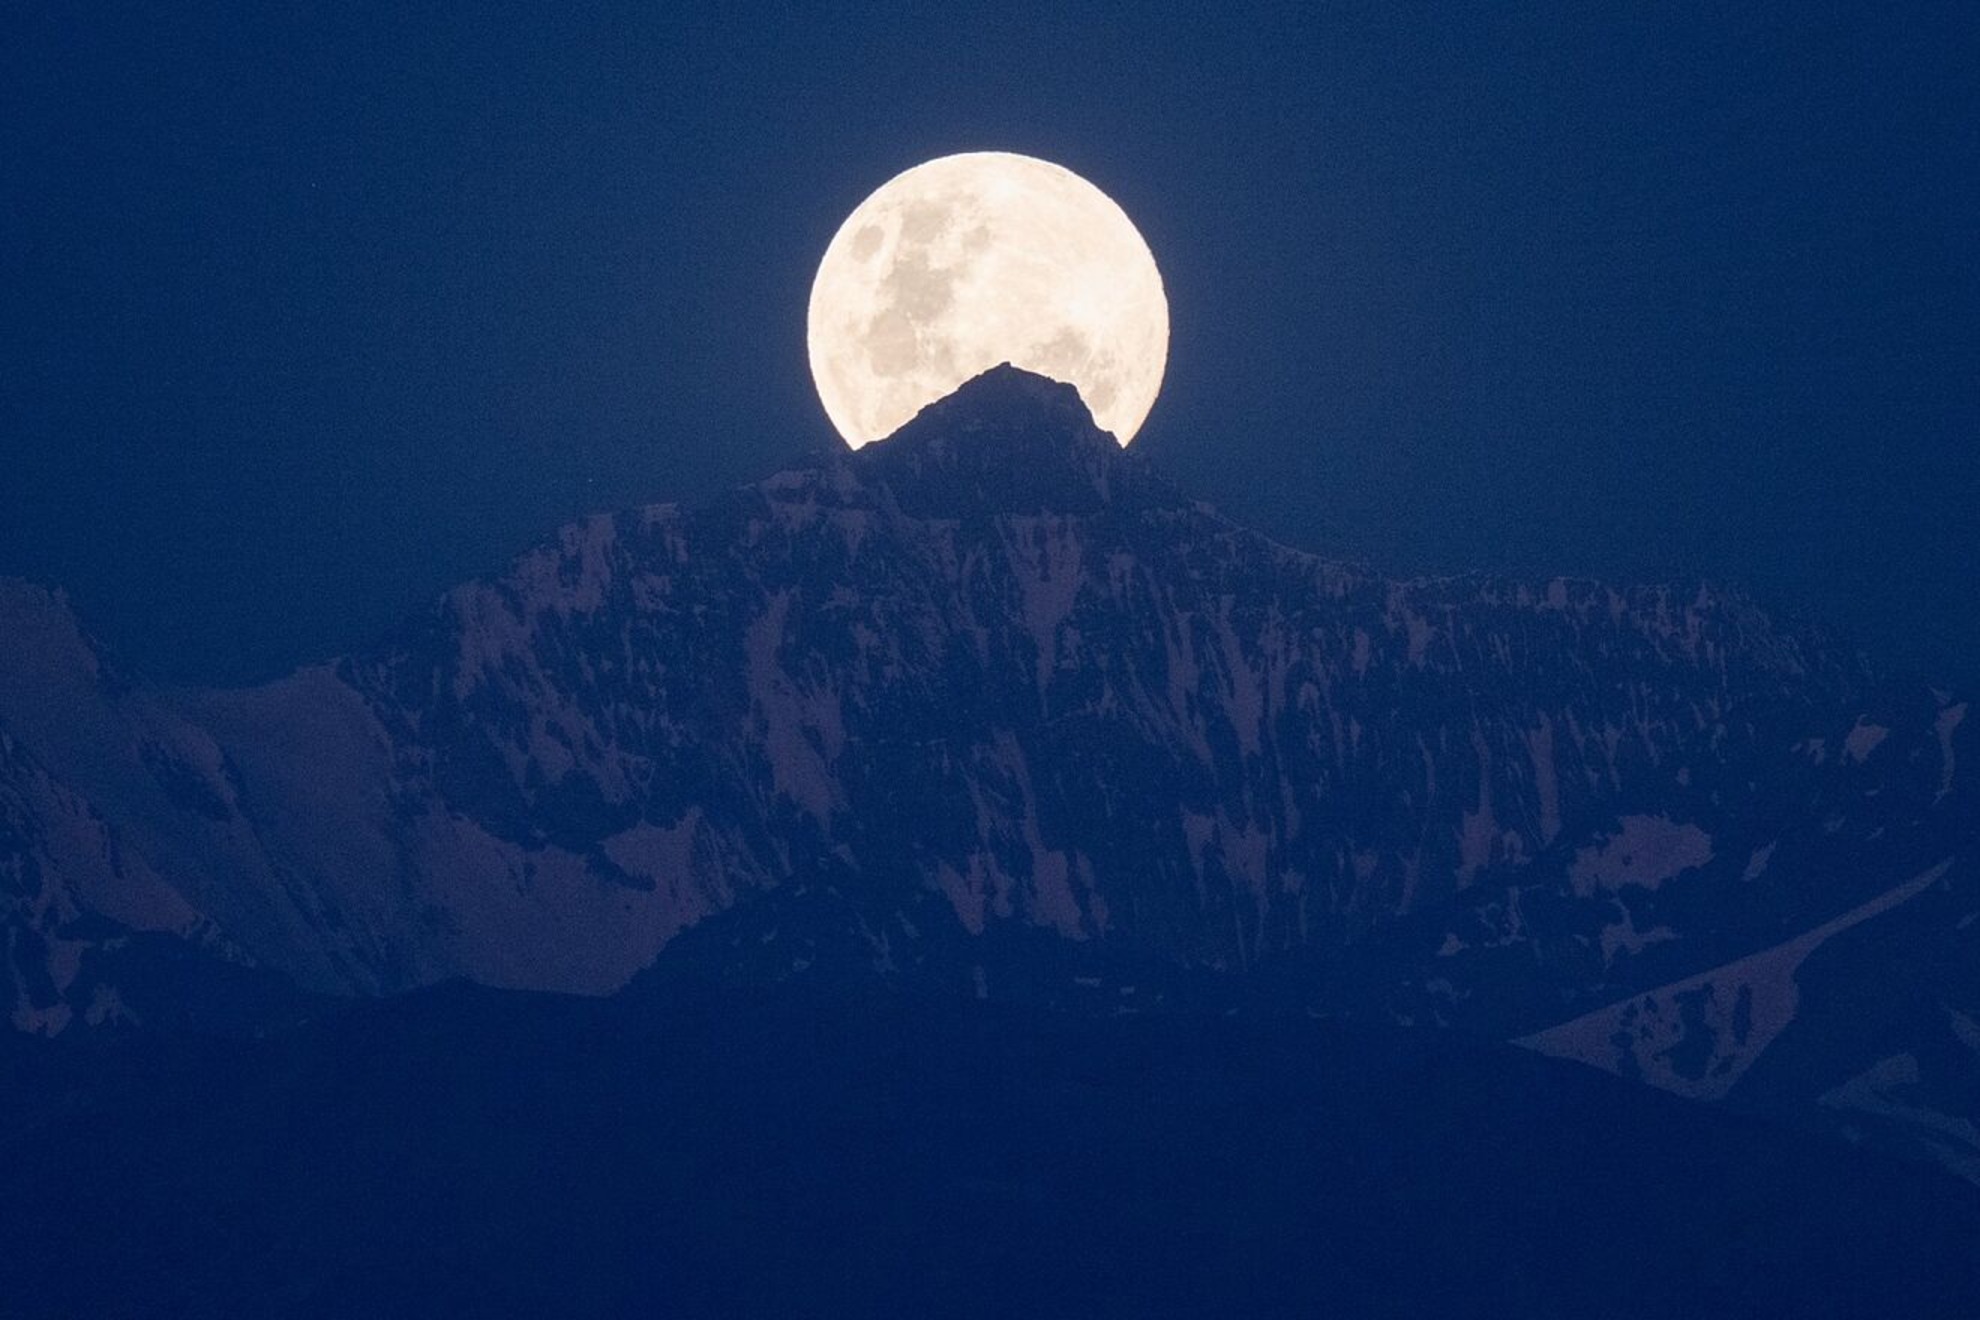 The Snow Moon will be the last full moon of the current winter cycle